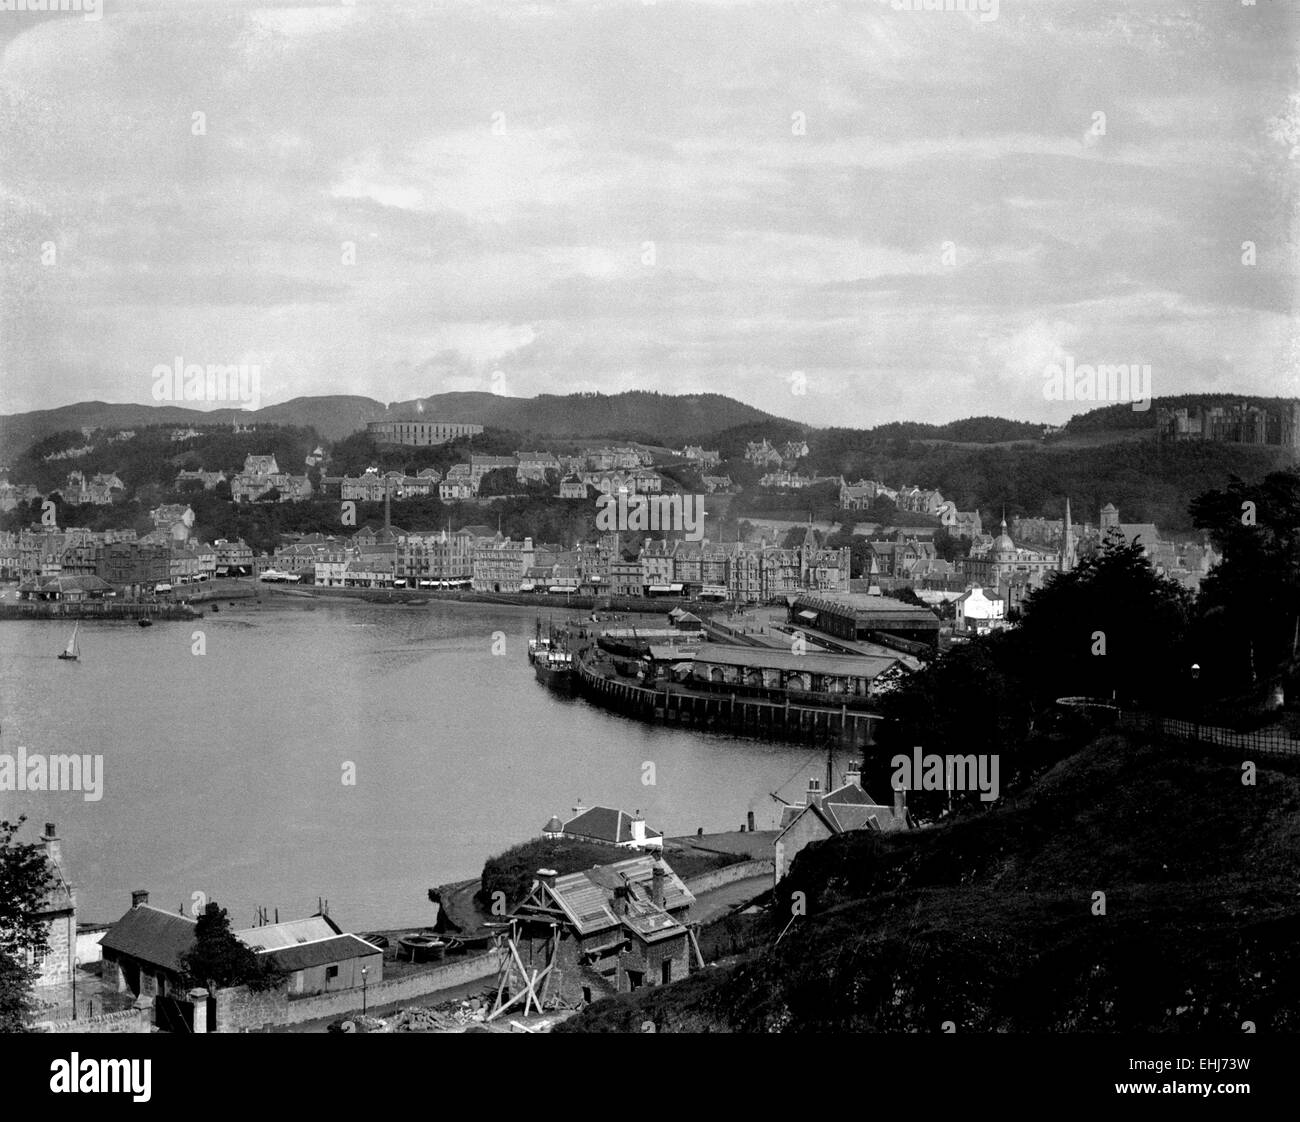 AJAXNETPHOTO - 1911 -12 APPROX. - SCOTTISH PORT - OBAN, ARGYLL IN THE EDWARDIAN ERA. McCAIG'S TOWER, A PARTLY COMPLETED MOCK COLLISEUM COMMISSIONED BY JOHN STUART McCAIG (1824-1902) STANDS ON A HILL ABOVE THE TOWN (LEFT, CENTRE.). PHOTO:AJAX VINTAGE PICTURE LIBRARY REF:()PLA OBAN 1900S 80201 9 Stock Photo